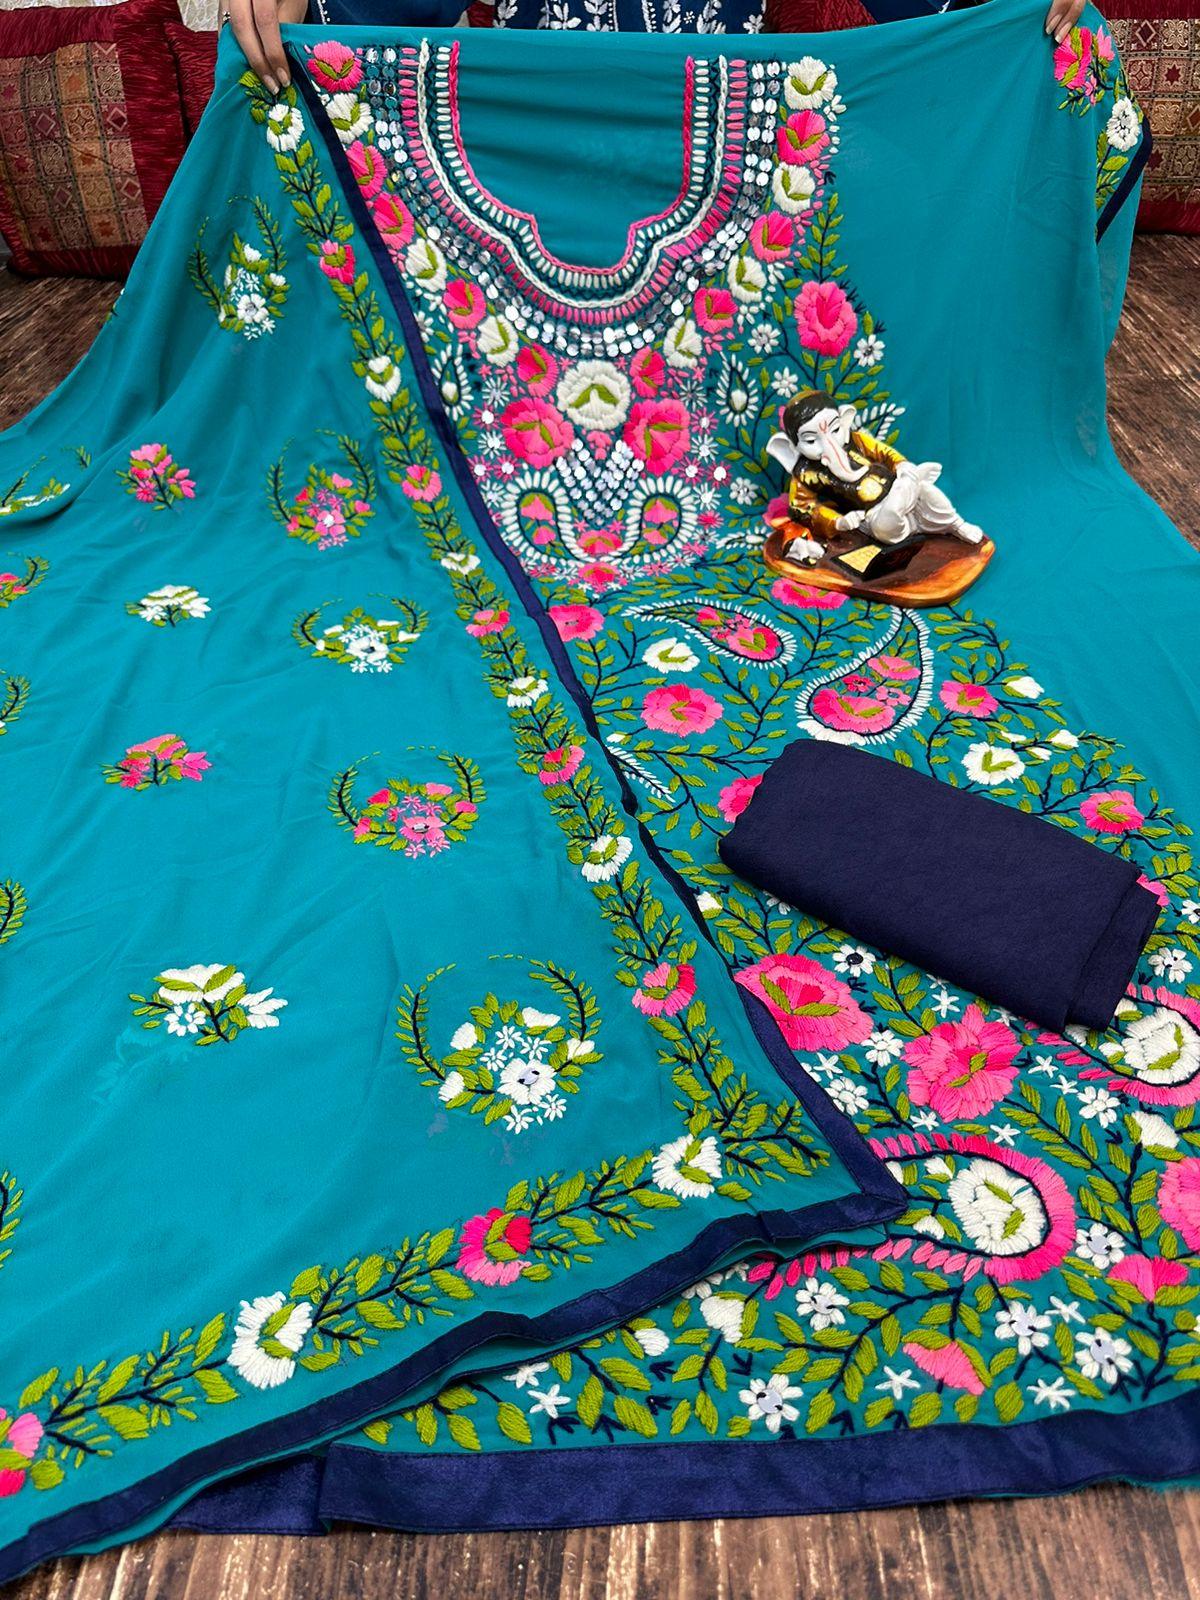 Design-2 Blue Super Georgette Phulkari Suits with Beautiful Embroidery Shopping Online - Inayakhan Shop 